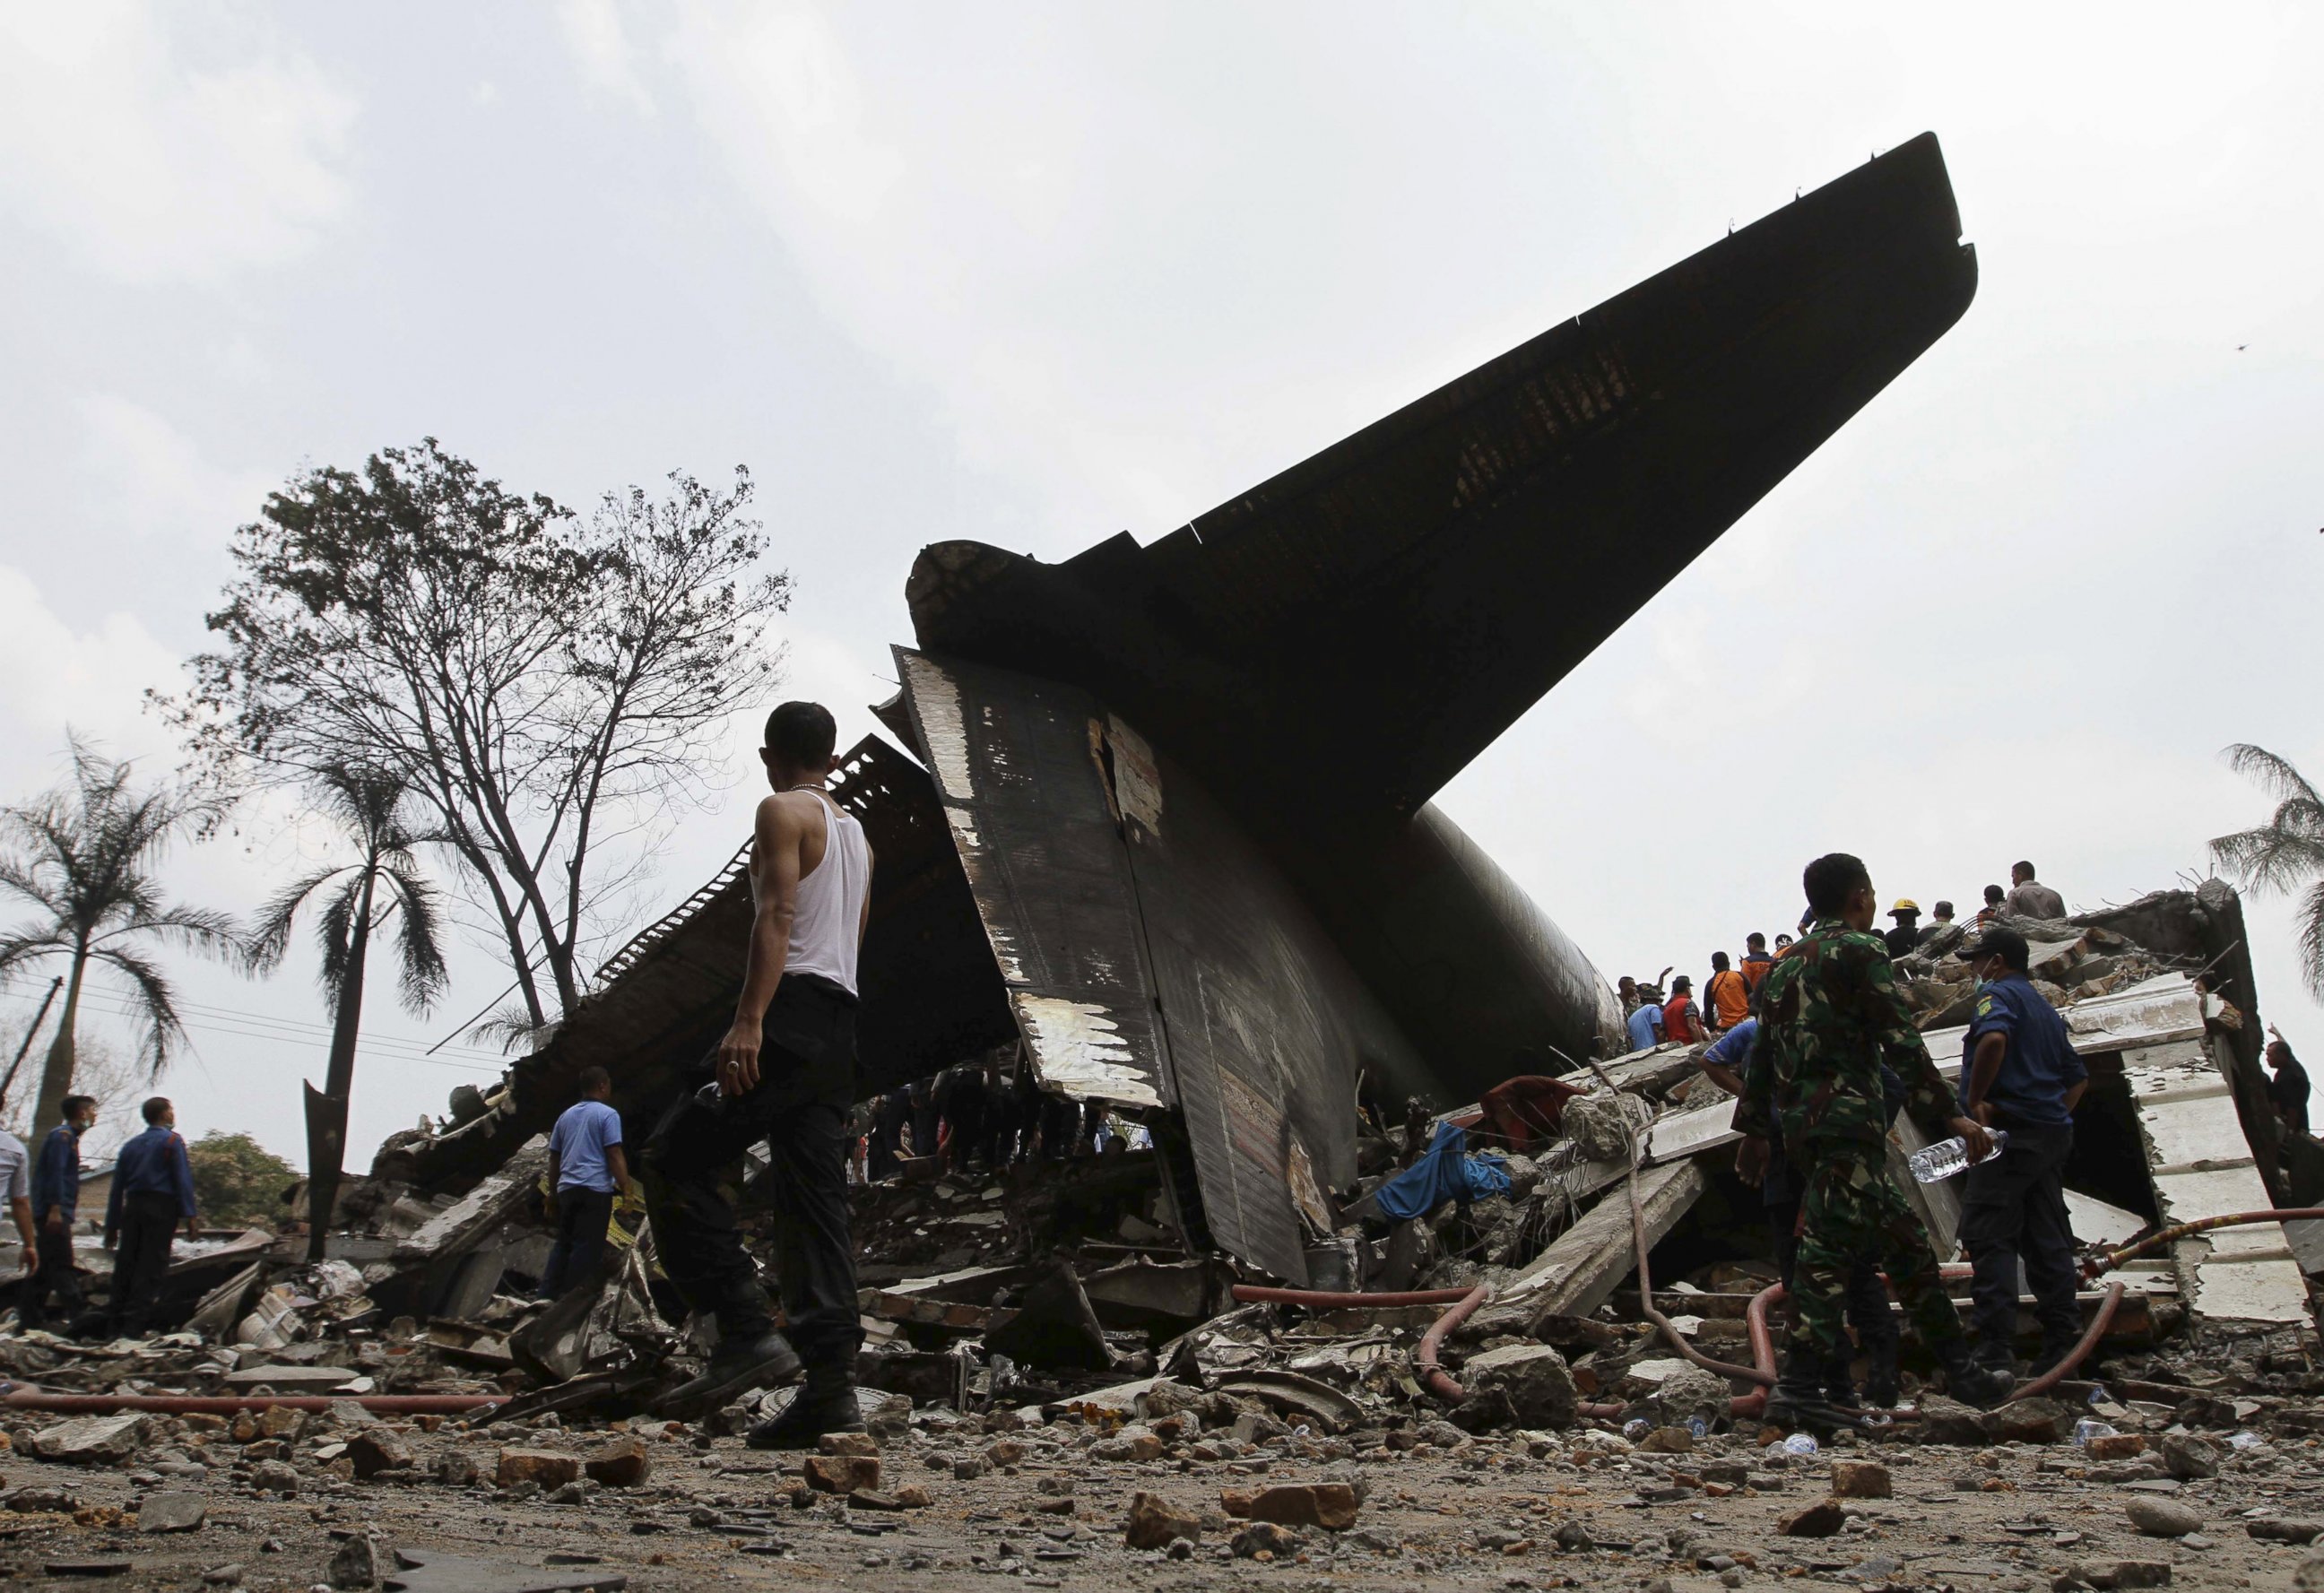 PHOTO: Security forces and rescue teams examine the the wreckage of an air force cargo plane that crashed in Medan, North Sumatra, Indonesia, June 30, 2015.